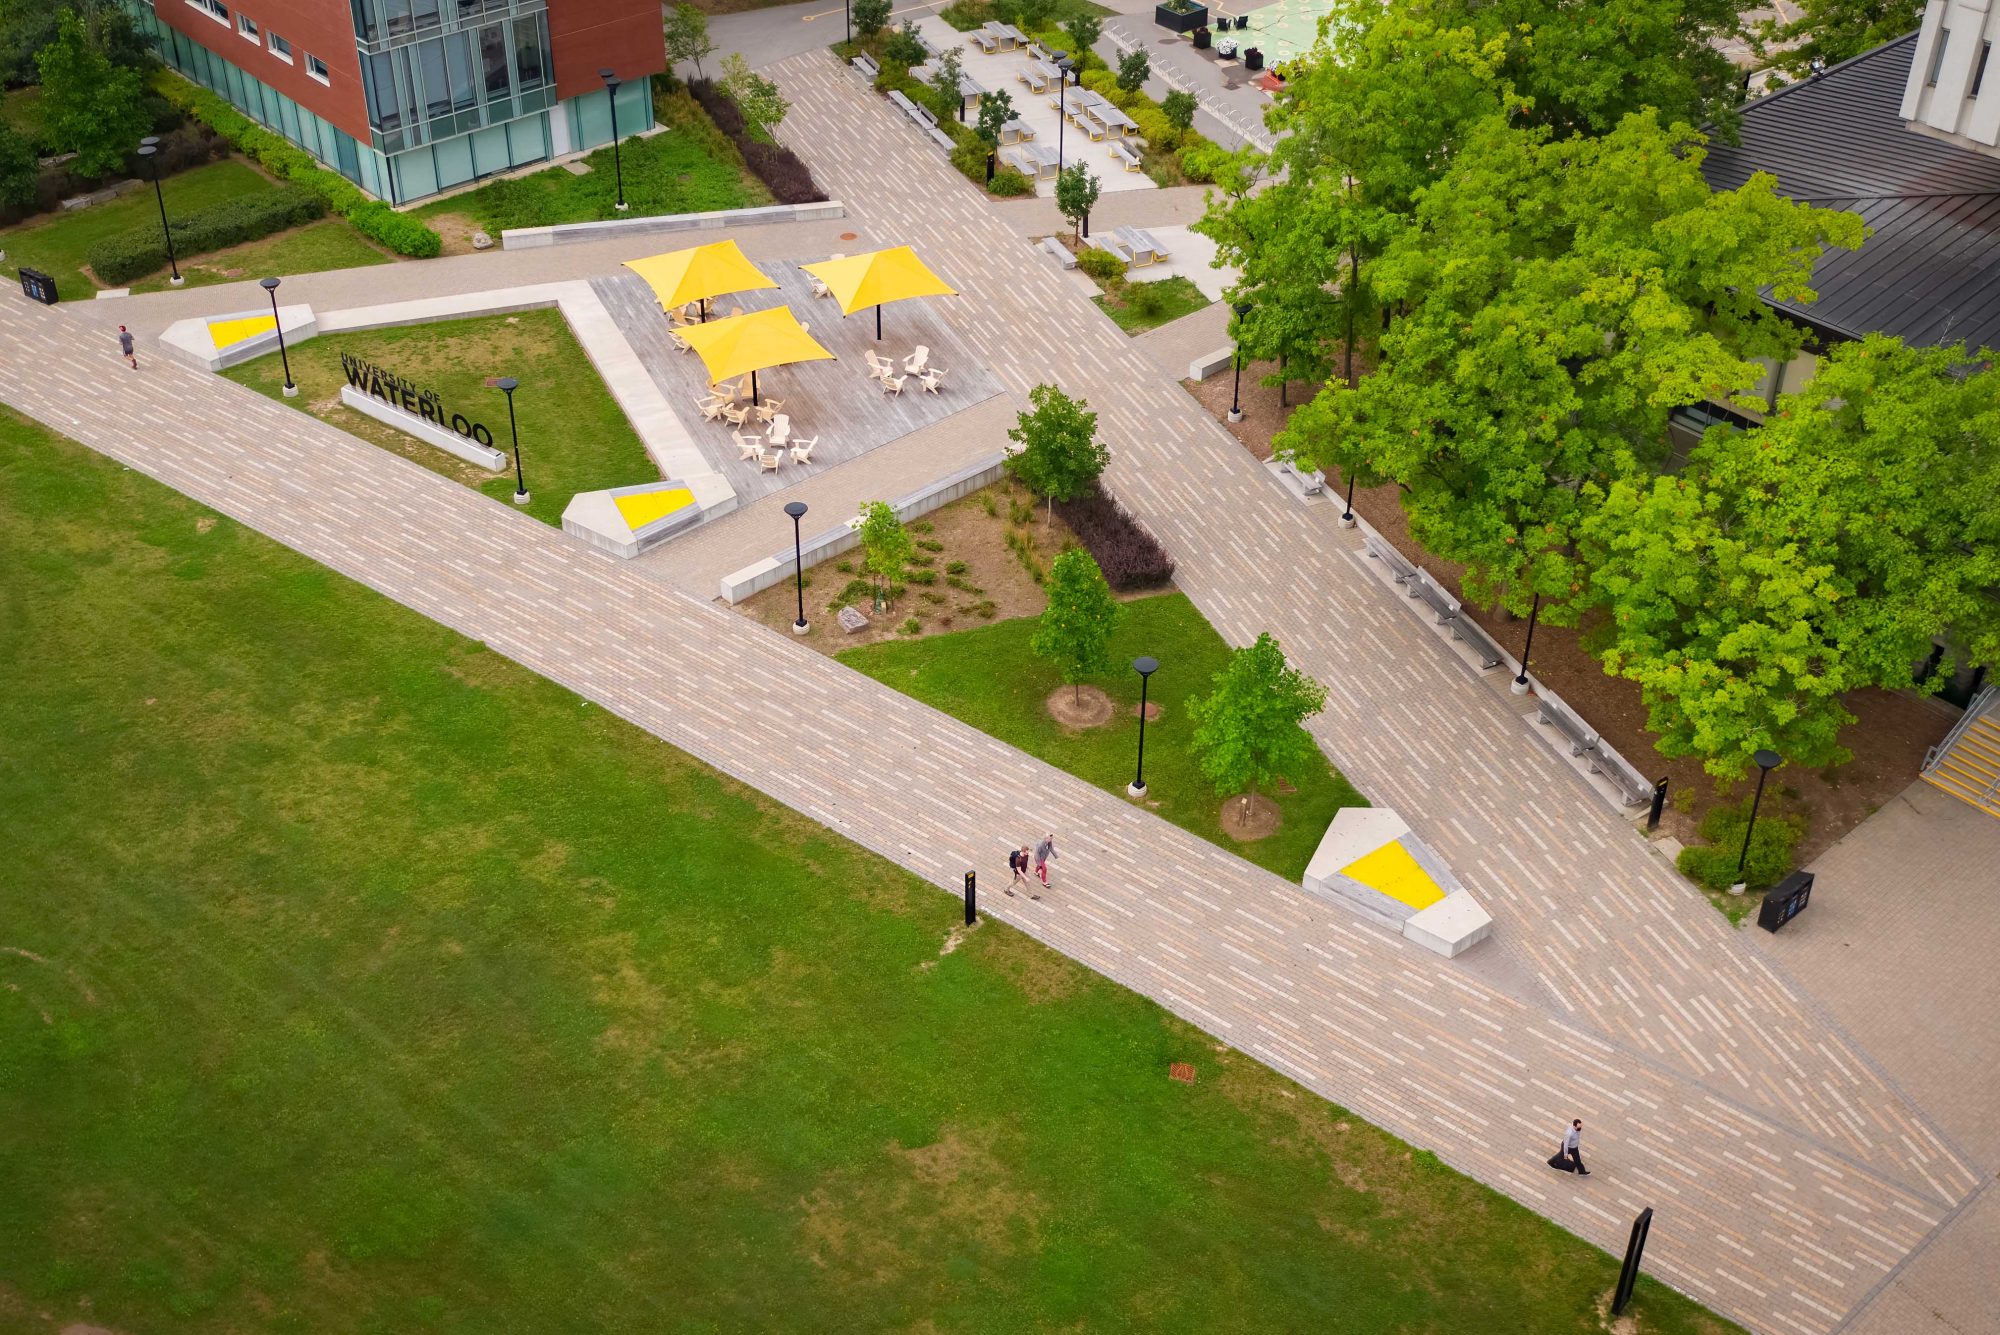 Outdoor common area at the University of Waterloo with three yellow umbrellas and Muskoka chairs. Linear interlocked paving is in the shape of a letter A.